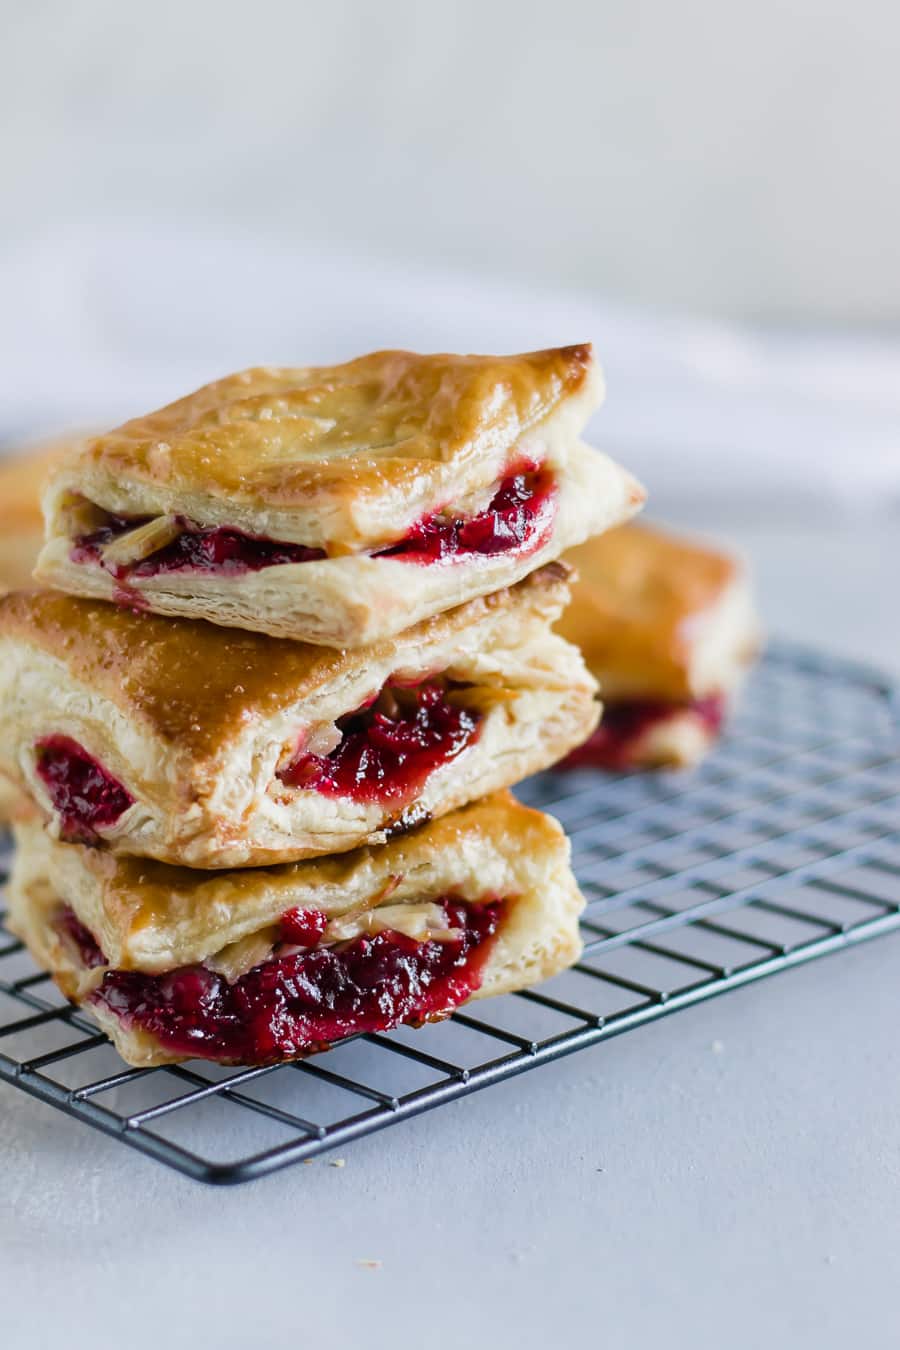 Leftover Cranberry + Turkey Turnovers. Repurpose Thanksgiving leftovers by making savory sweet pastelitos (or hand pies) using puff pastry sheets!